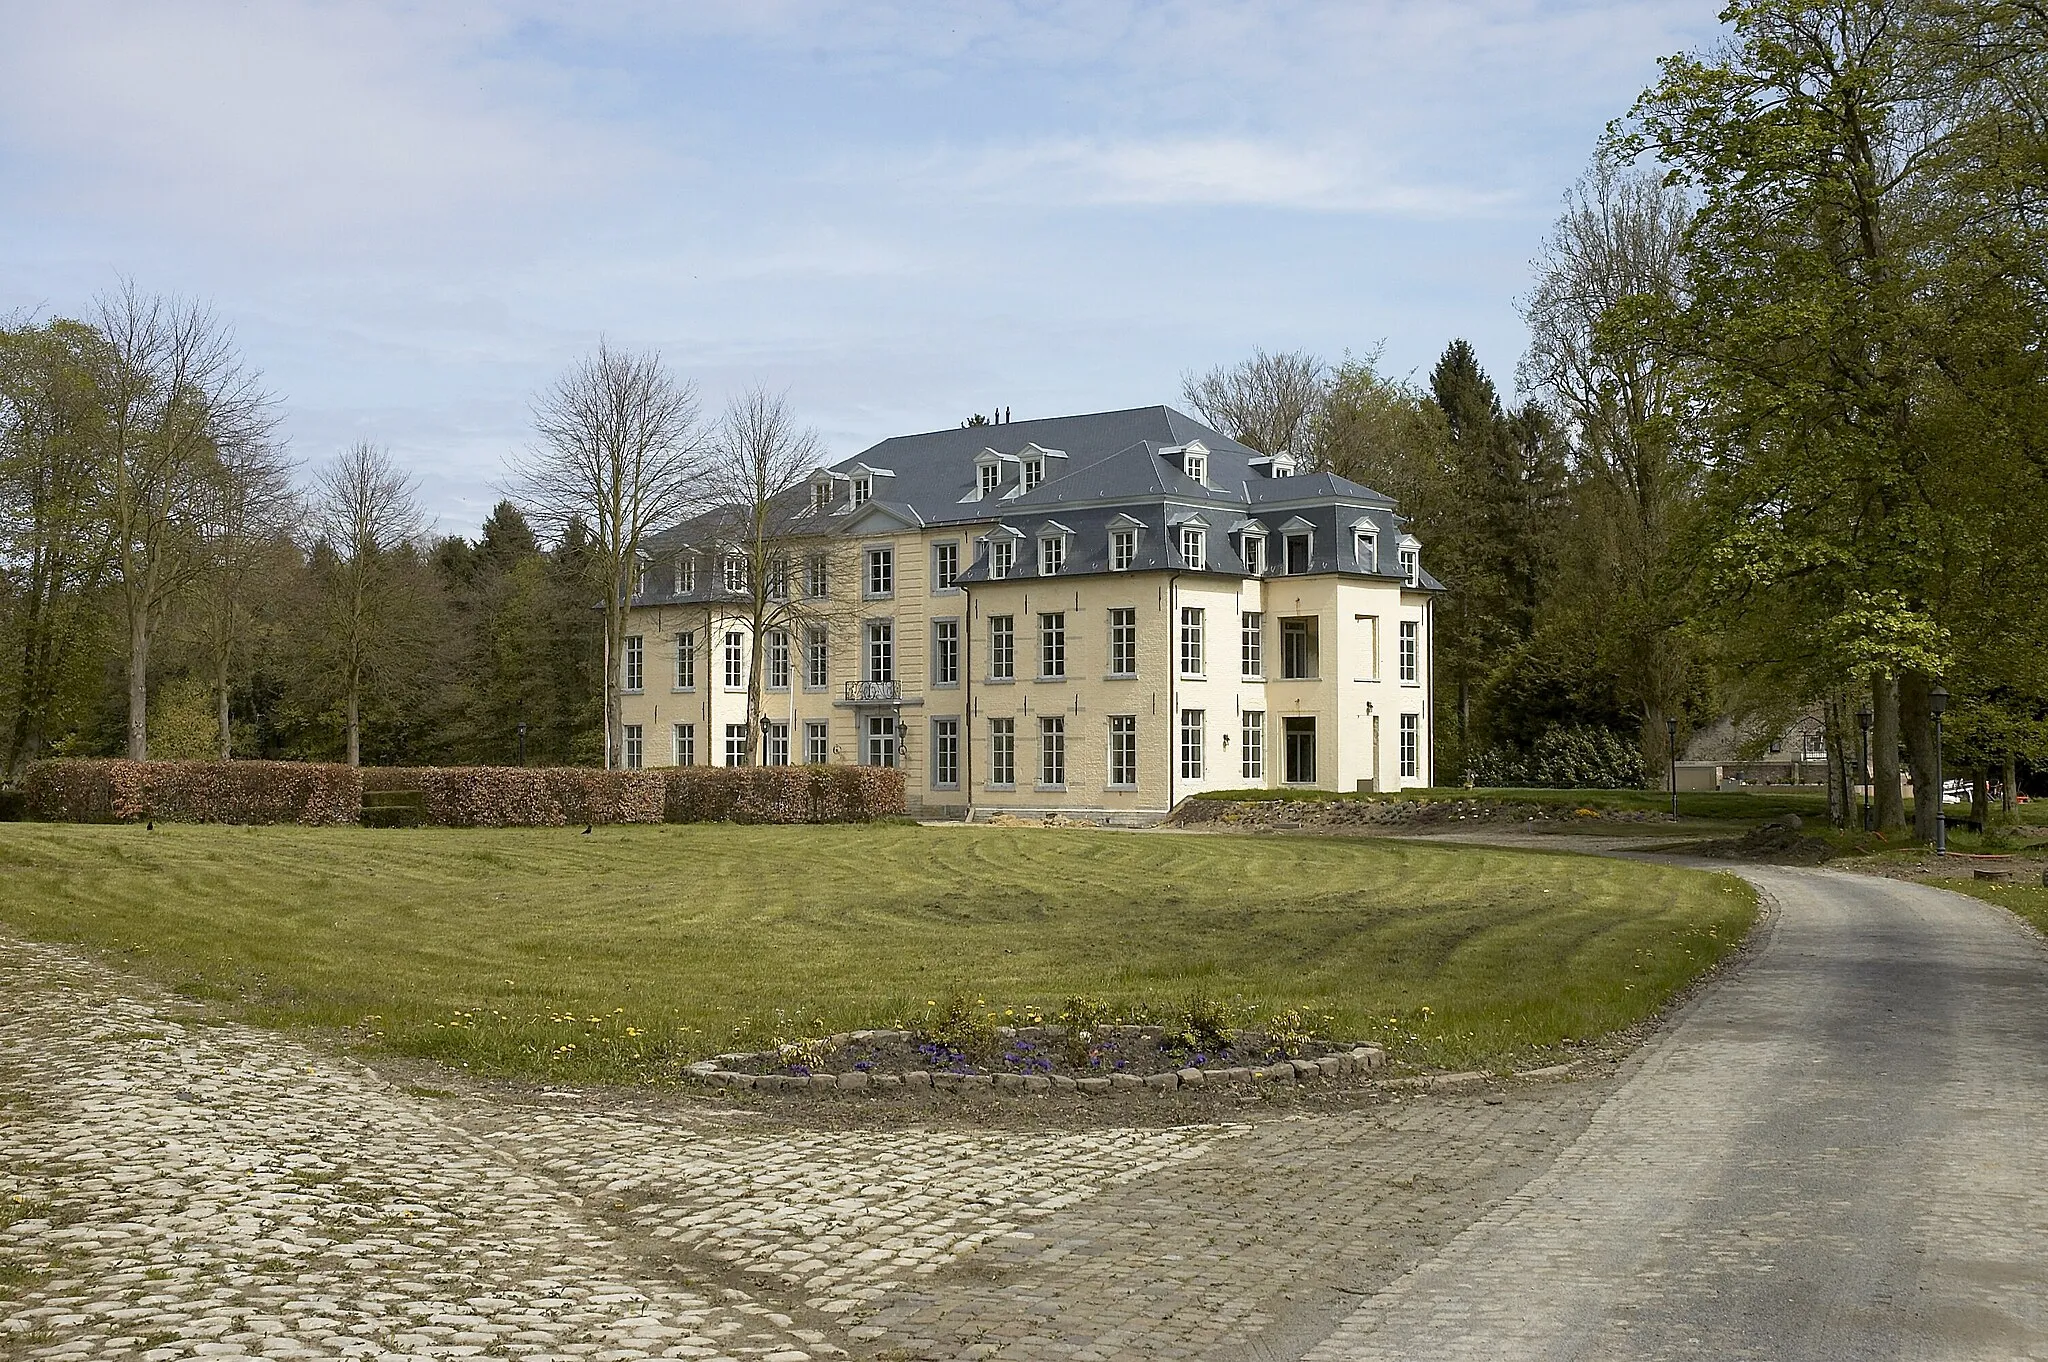 Photo showing: Castle Neerijse in Neerijse, Belgium.

Camera location 50° 49′ 02.2″ N, 4° 37′ 56.2″ E View this and other nearby images on: OpenStreetMap 50.817278;    4.632278